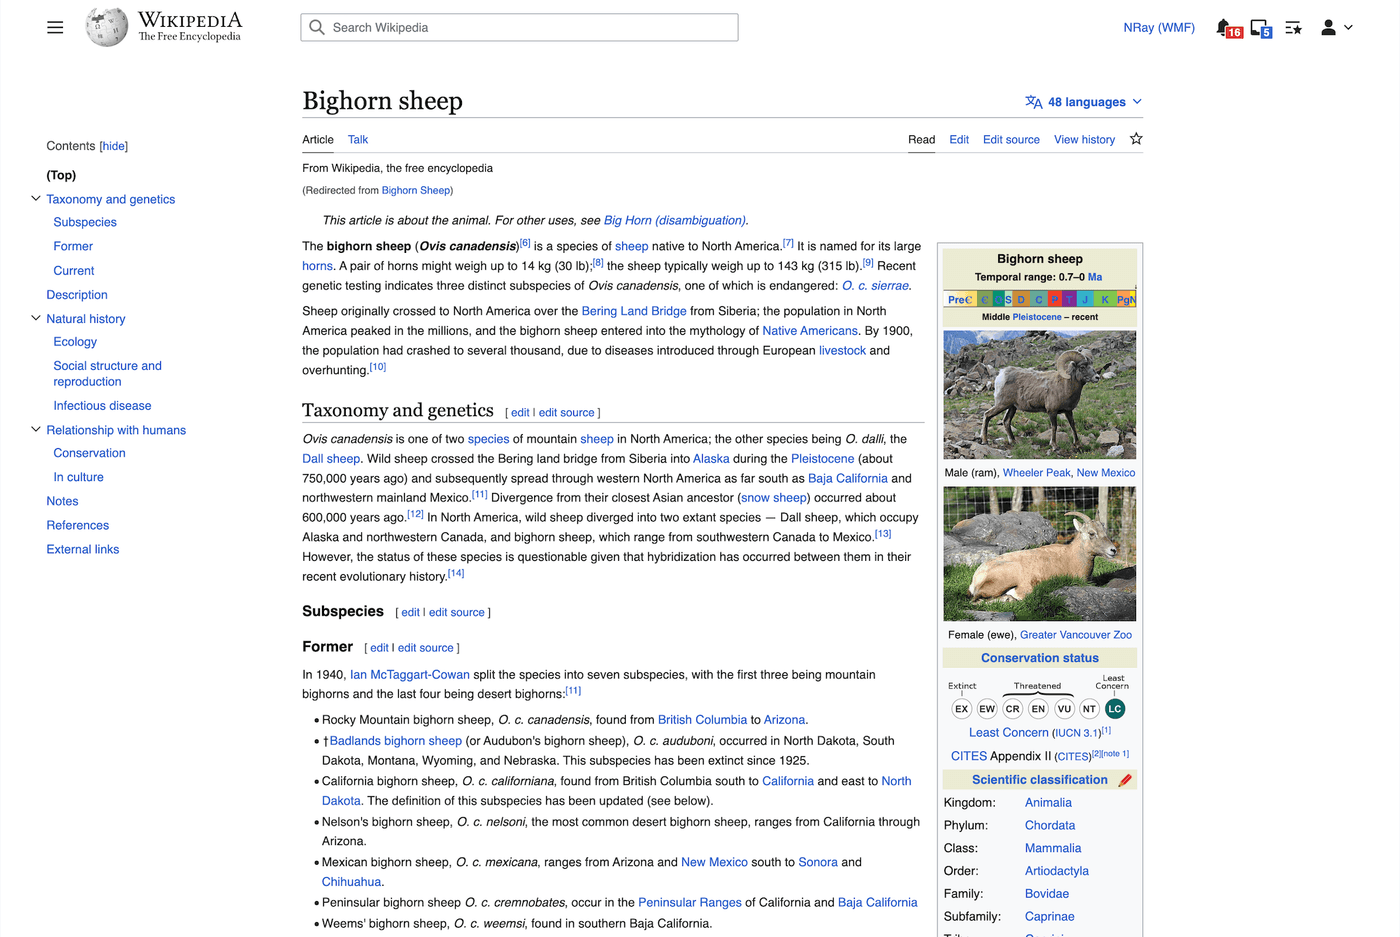 A screenshot of the new Vector-2022 skin on Wikipedia showing an article of a Bighorn Sheep.